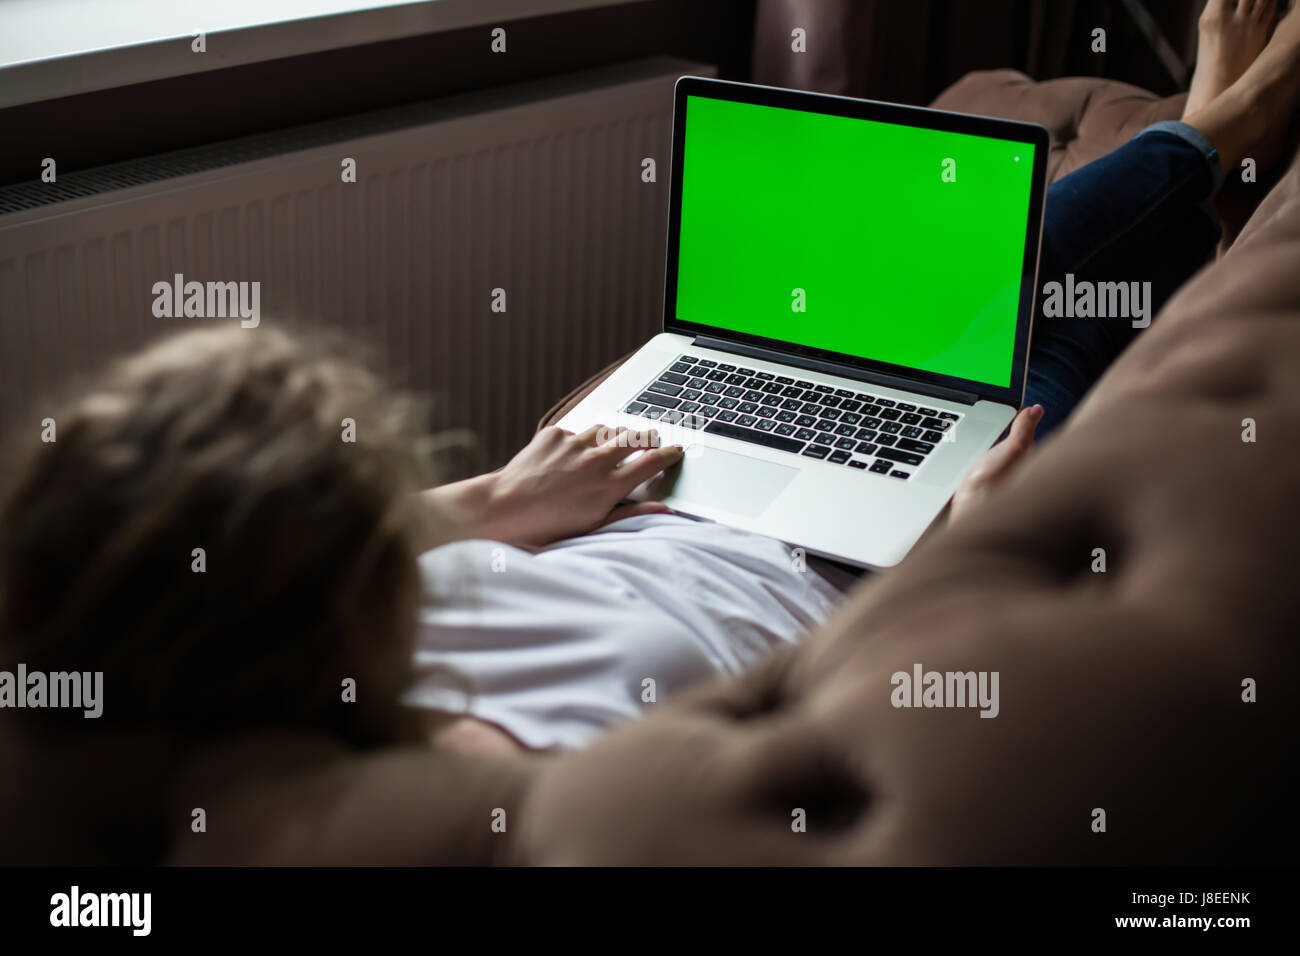 Girl using laptop with green screen. Woman lying on the sofa. Stock Photo